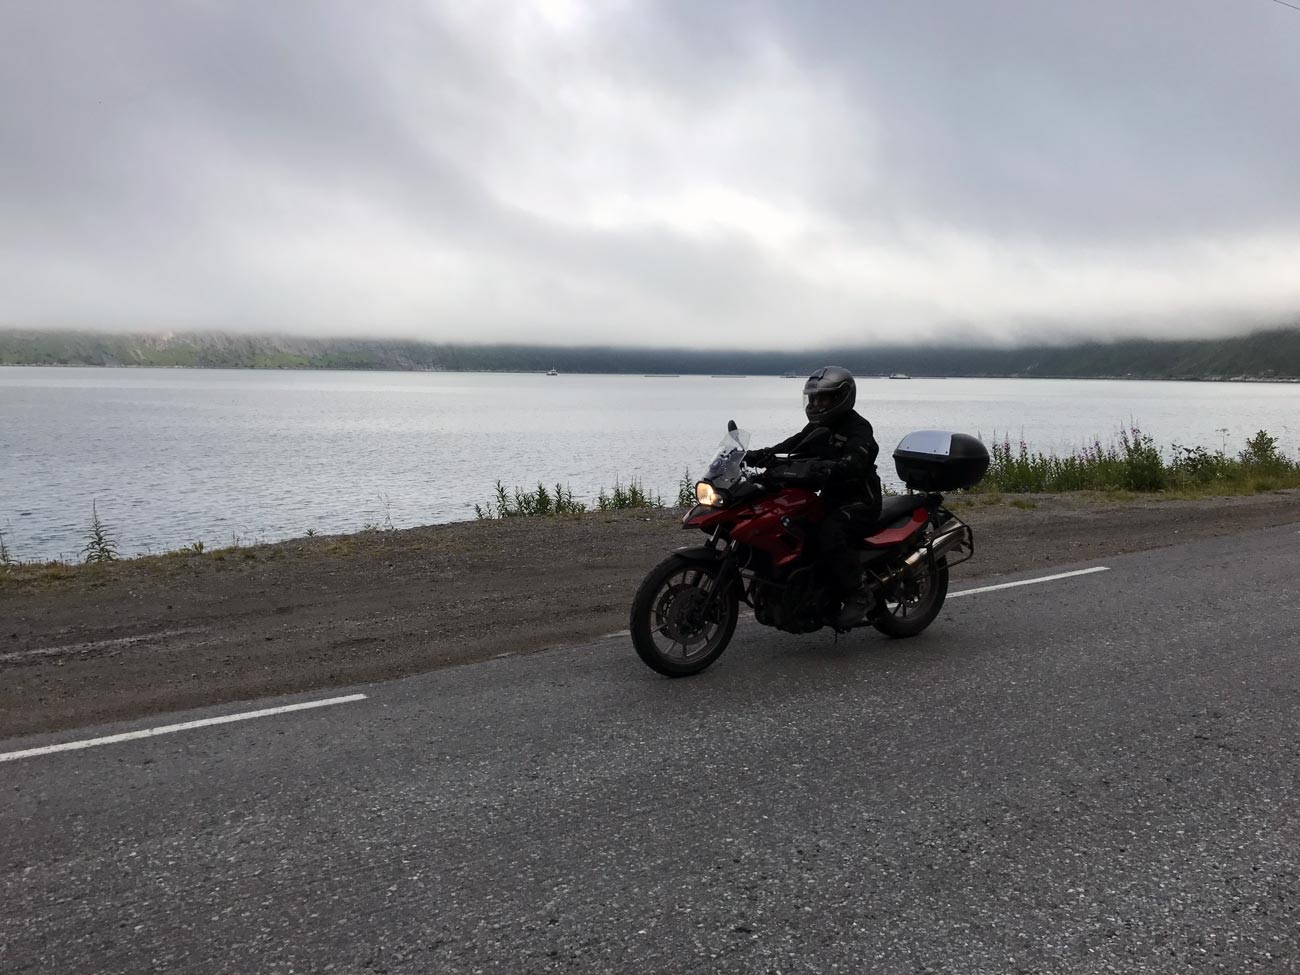 North Pole Adventure 2017, Motorcycle Tour in Norway, Days 25 - 27, Tromsø  to Narvik to Solvaer, Norway